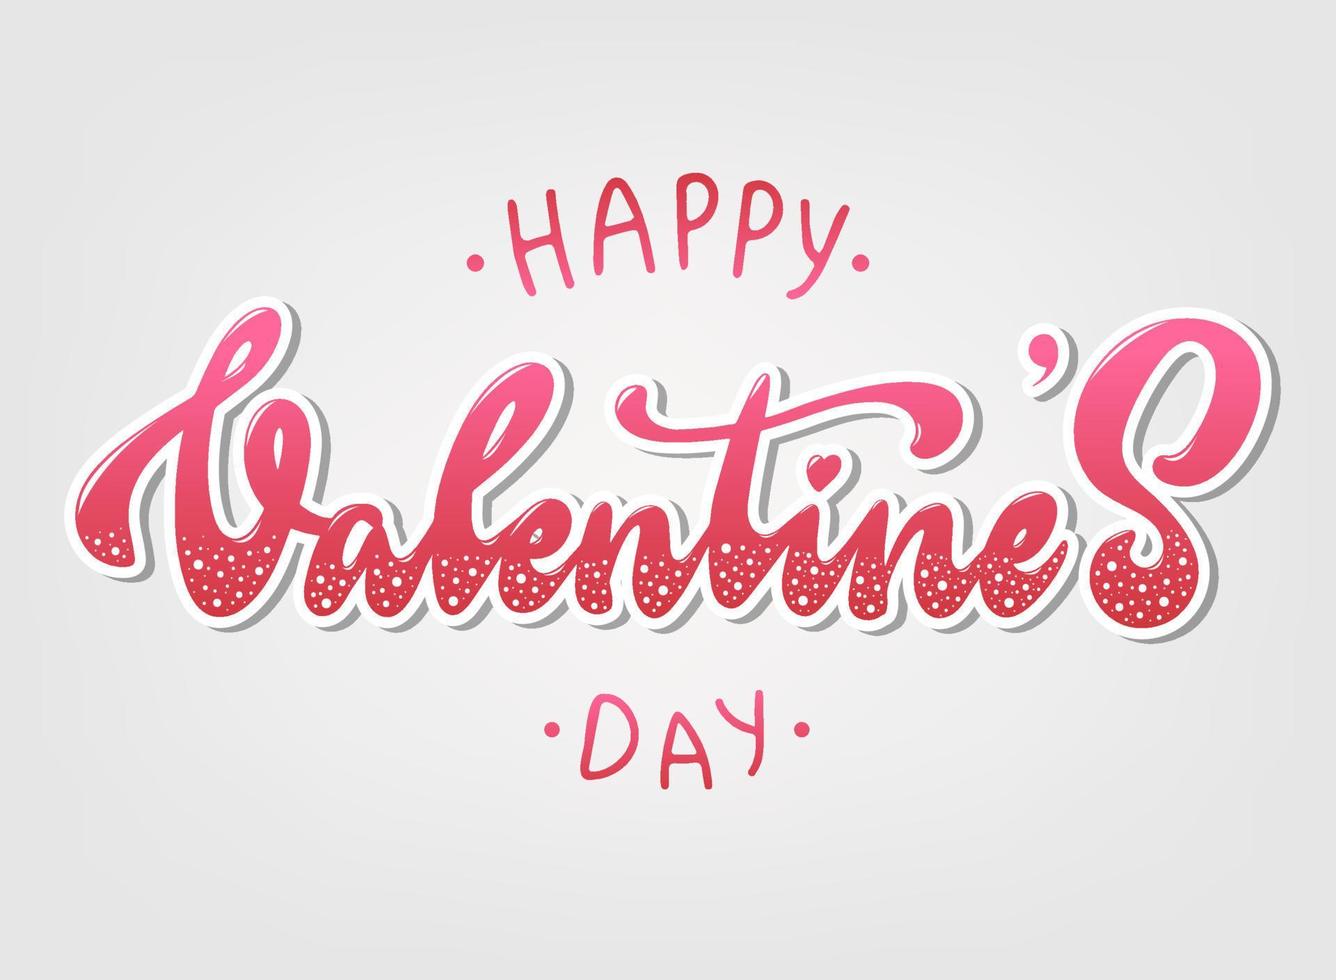 cute hand lettering quote 'Happy Valentine's day' for posters, banners, prints, cards, invitations, etc. festive typography inscription. EPS 10 vector